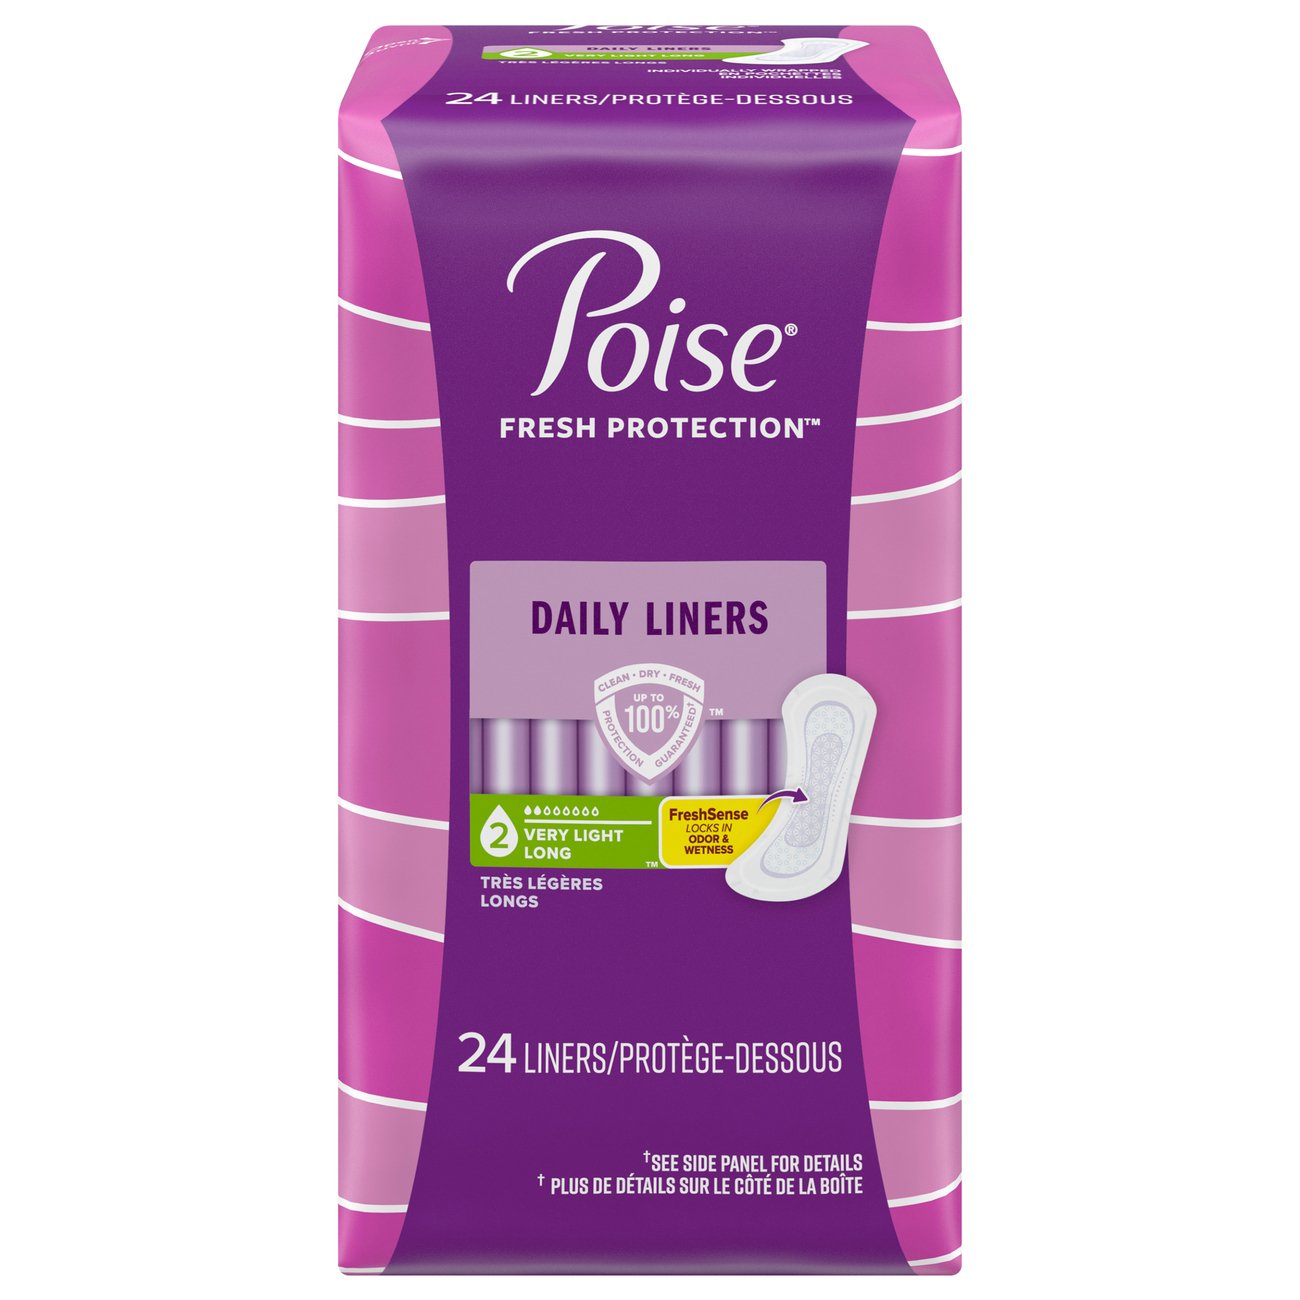 Poise Fresh Protection Very Light Long Liners - Shop Pads & Liners at H-E-B